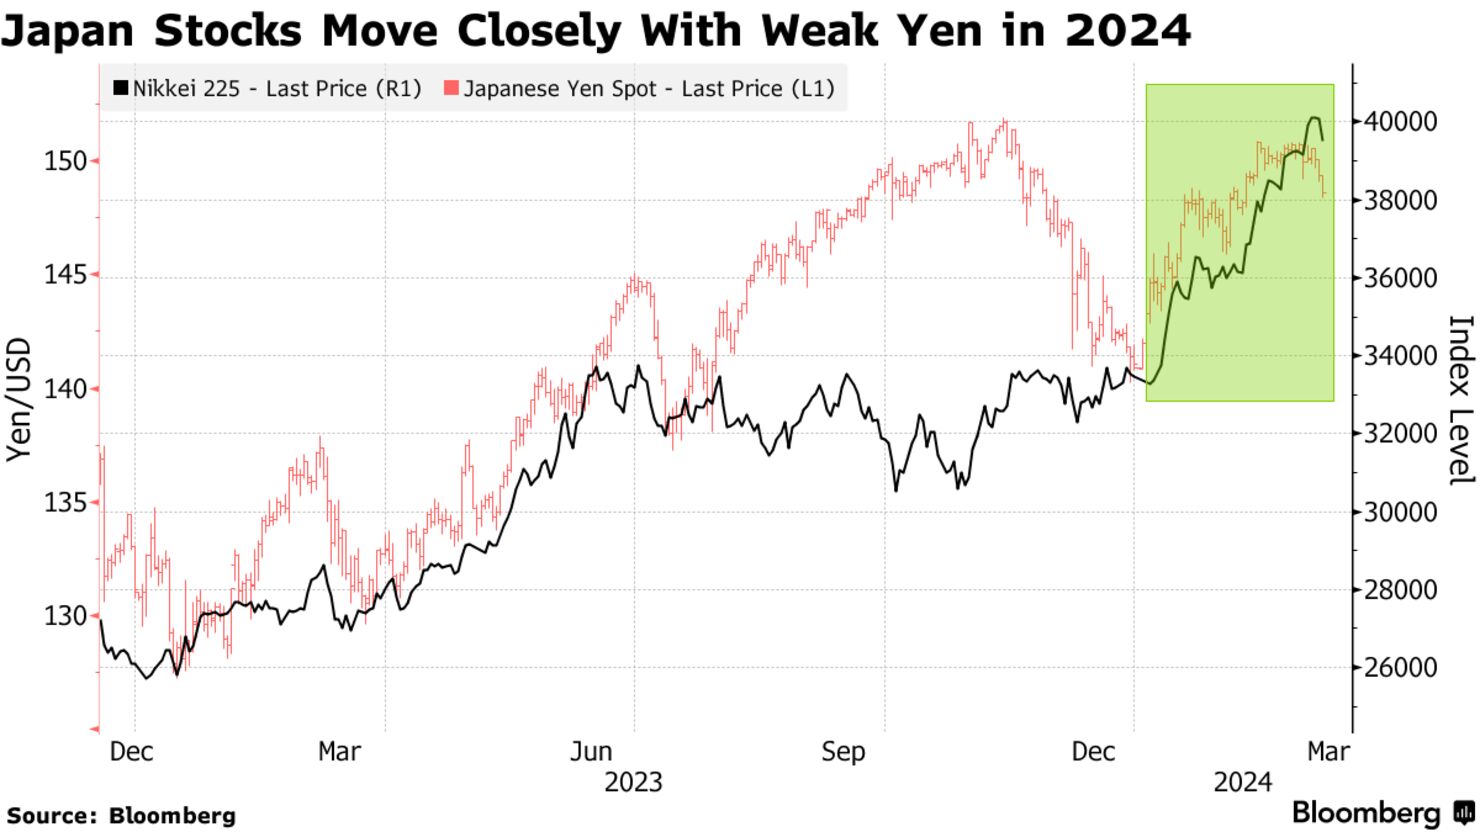 Japan Stocks Move Closely With Weak Yen in 2024